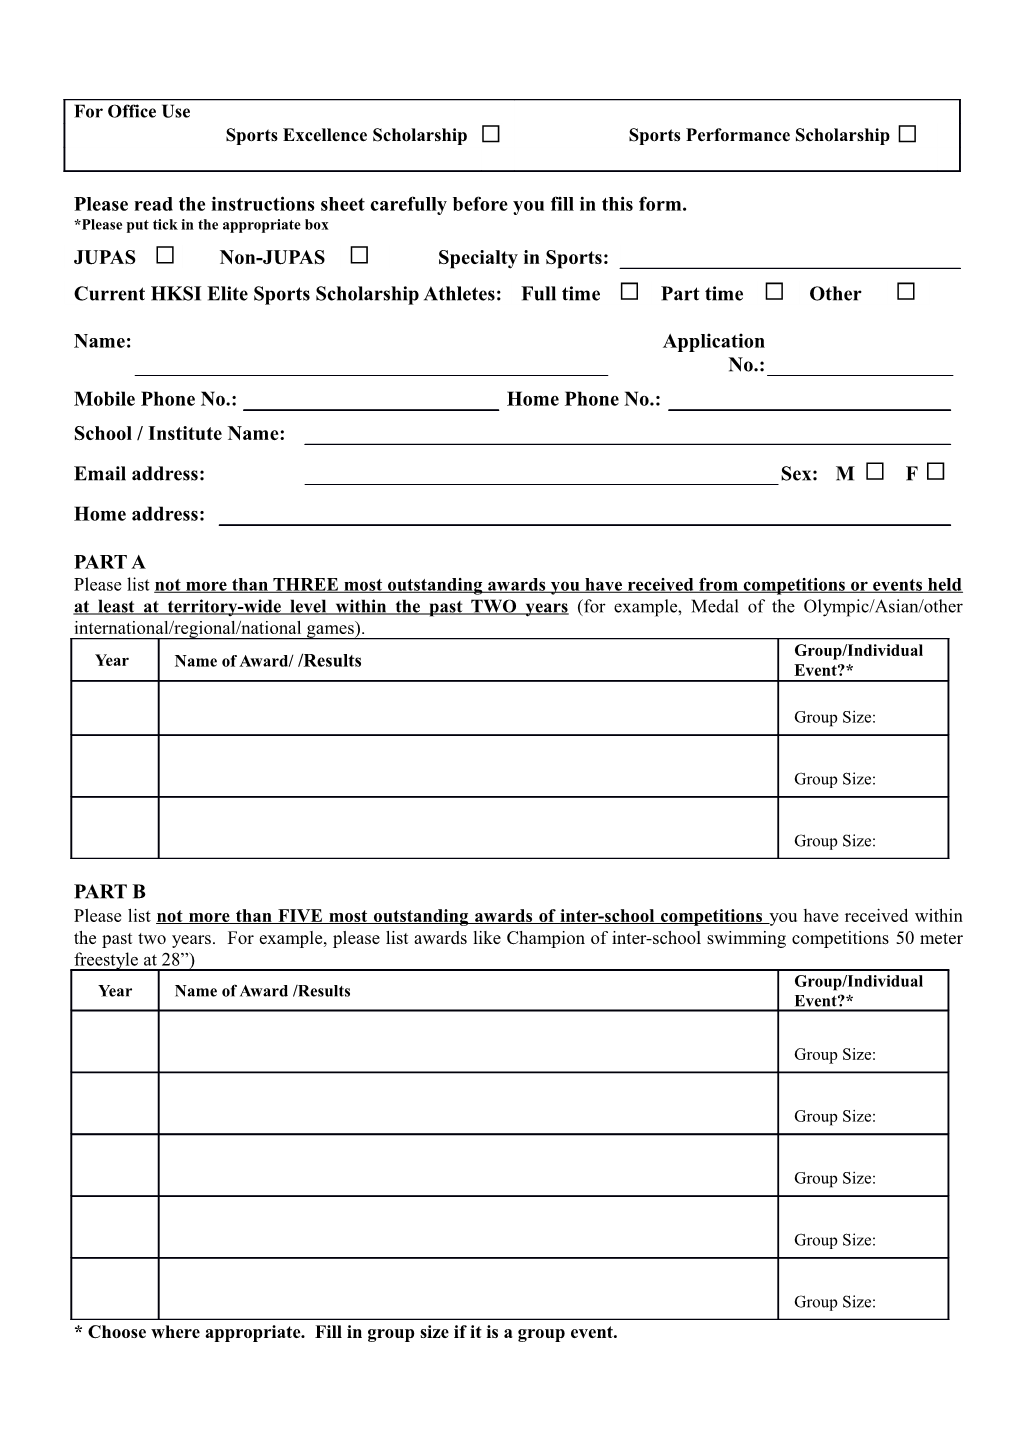 Please Read the Instruction Sheet Carefully Before You Fill in This Form